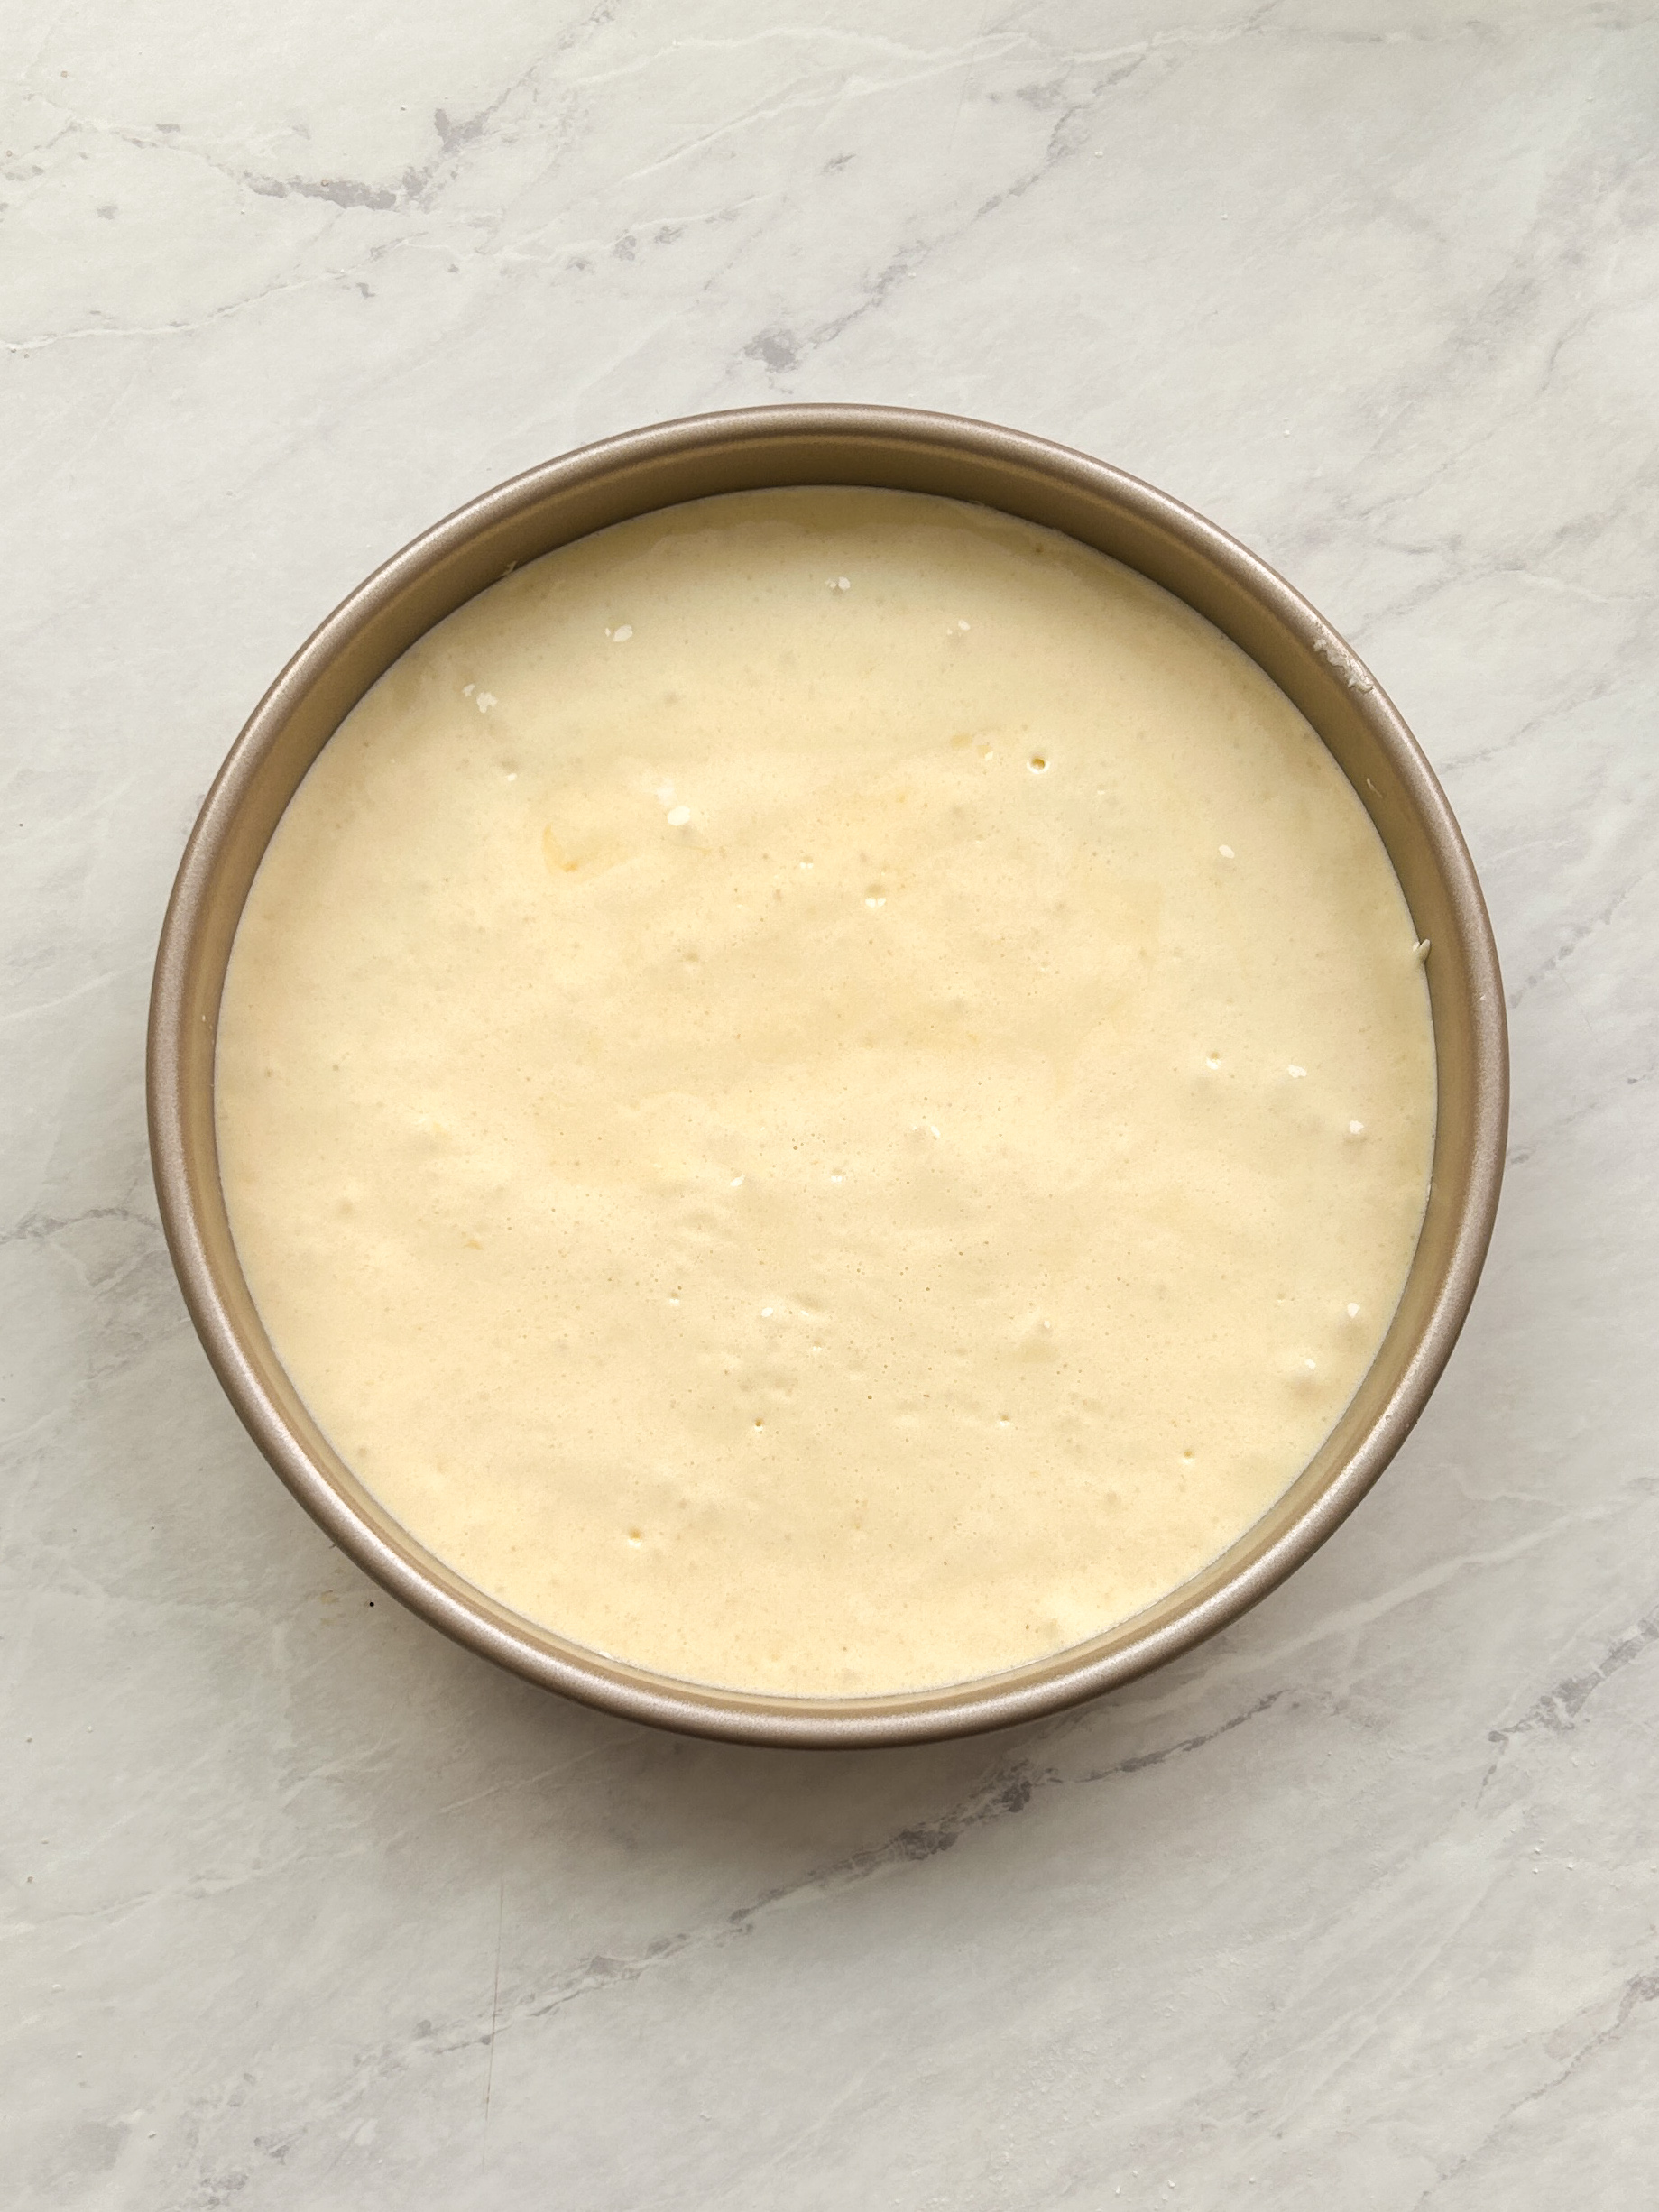 tres leches cake batter in a round baking tin